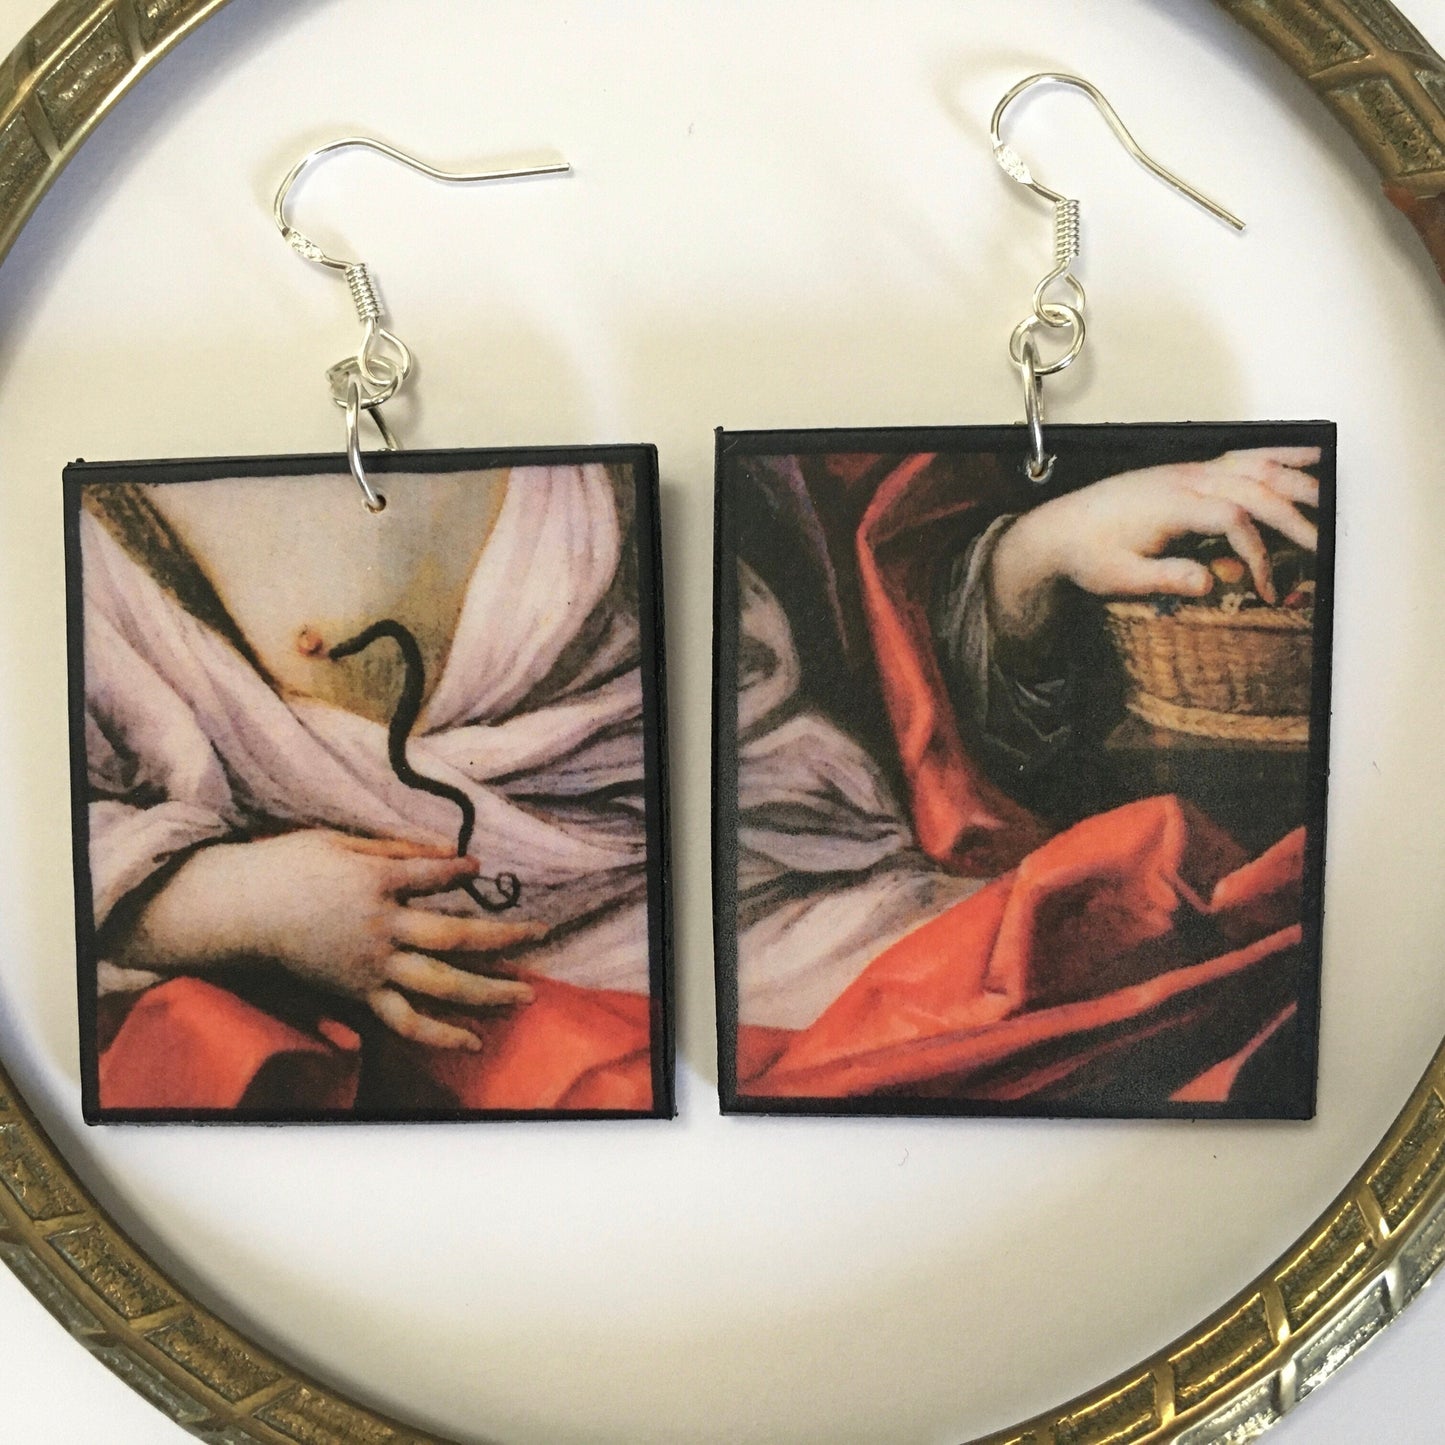 Cleopatra poisonous snake art painting by Italian artist Guido Reni on top of these aesthetic, uncommon, lightweight earrings. The earrings are made on sustainable wood with sterling silver hooks.  Obljewellery artsy gifts.